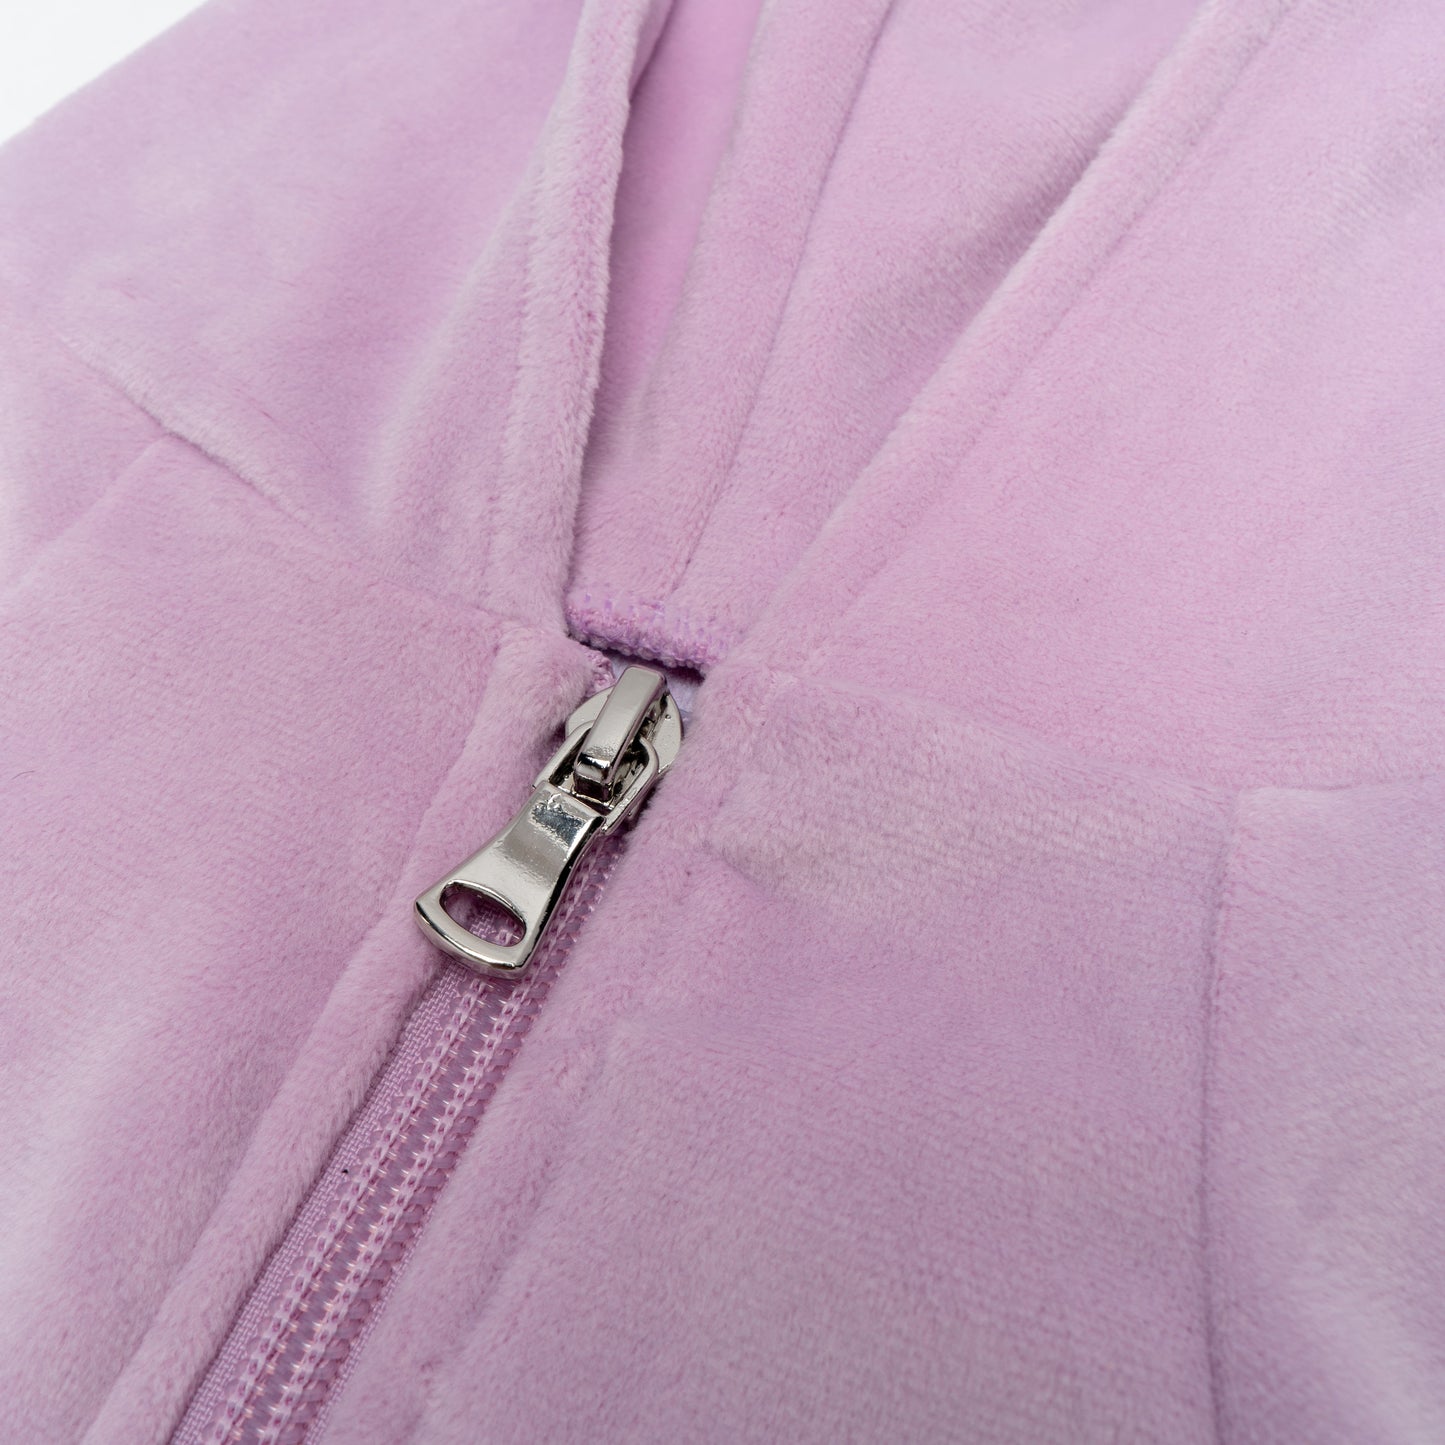 The Lilac Velour Hoodie